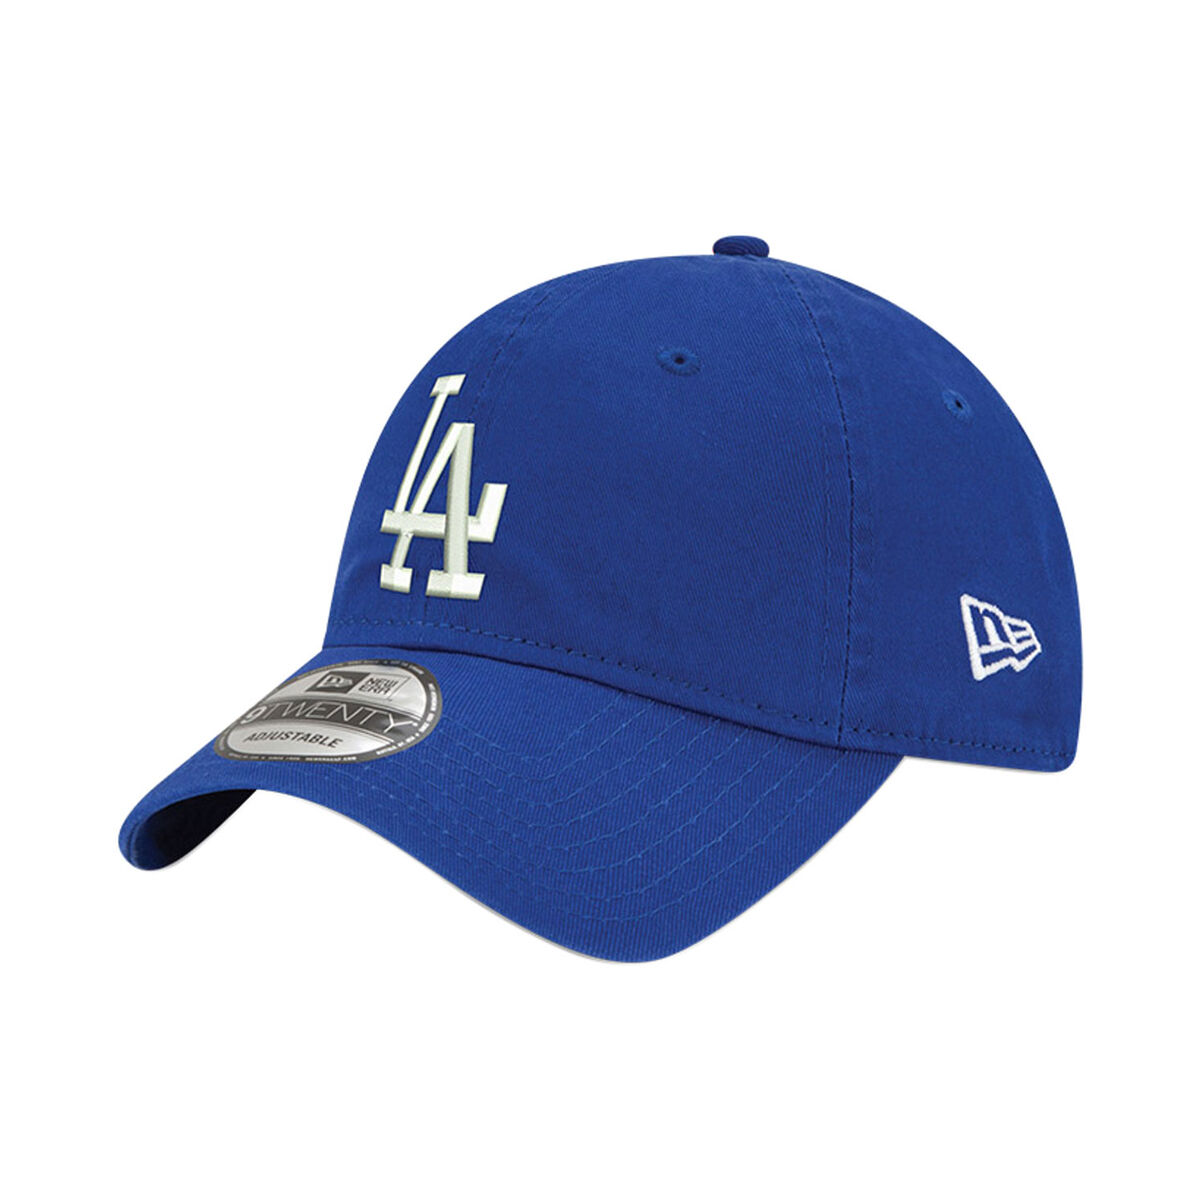 Men's Los Angeles Dodgers Majestic Royal/White Authentic Collection  On-Field 3/4-Sleeve Batting Practice Jersey